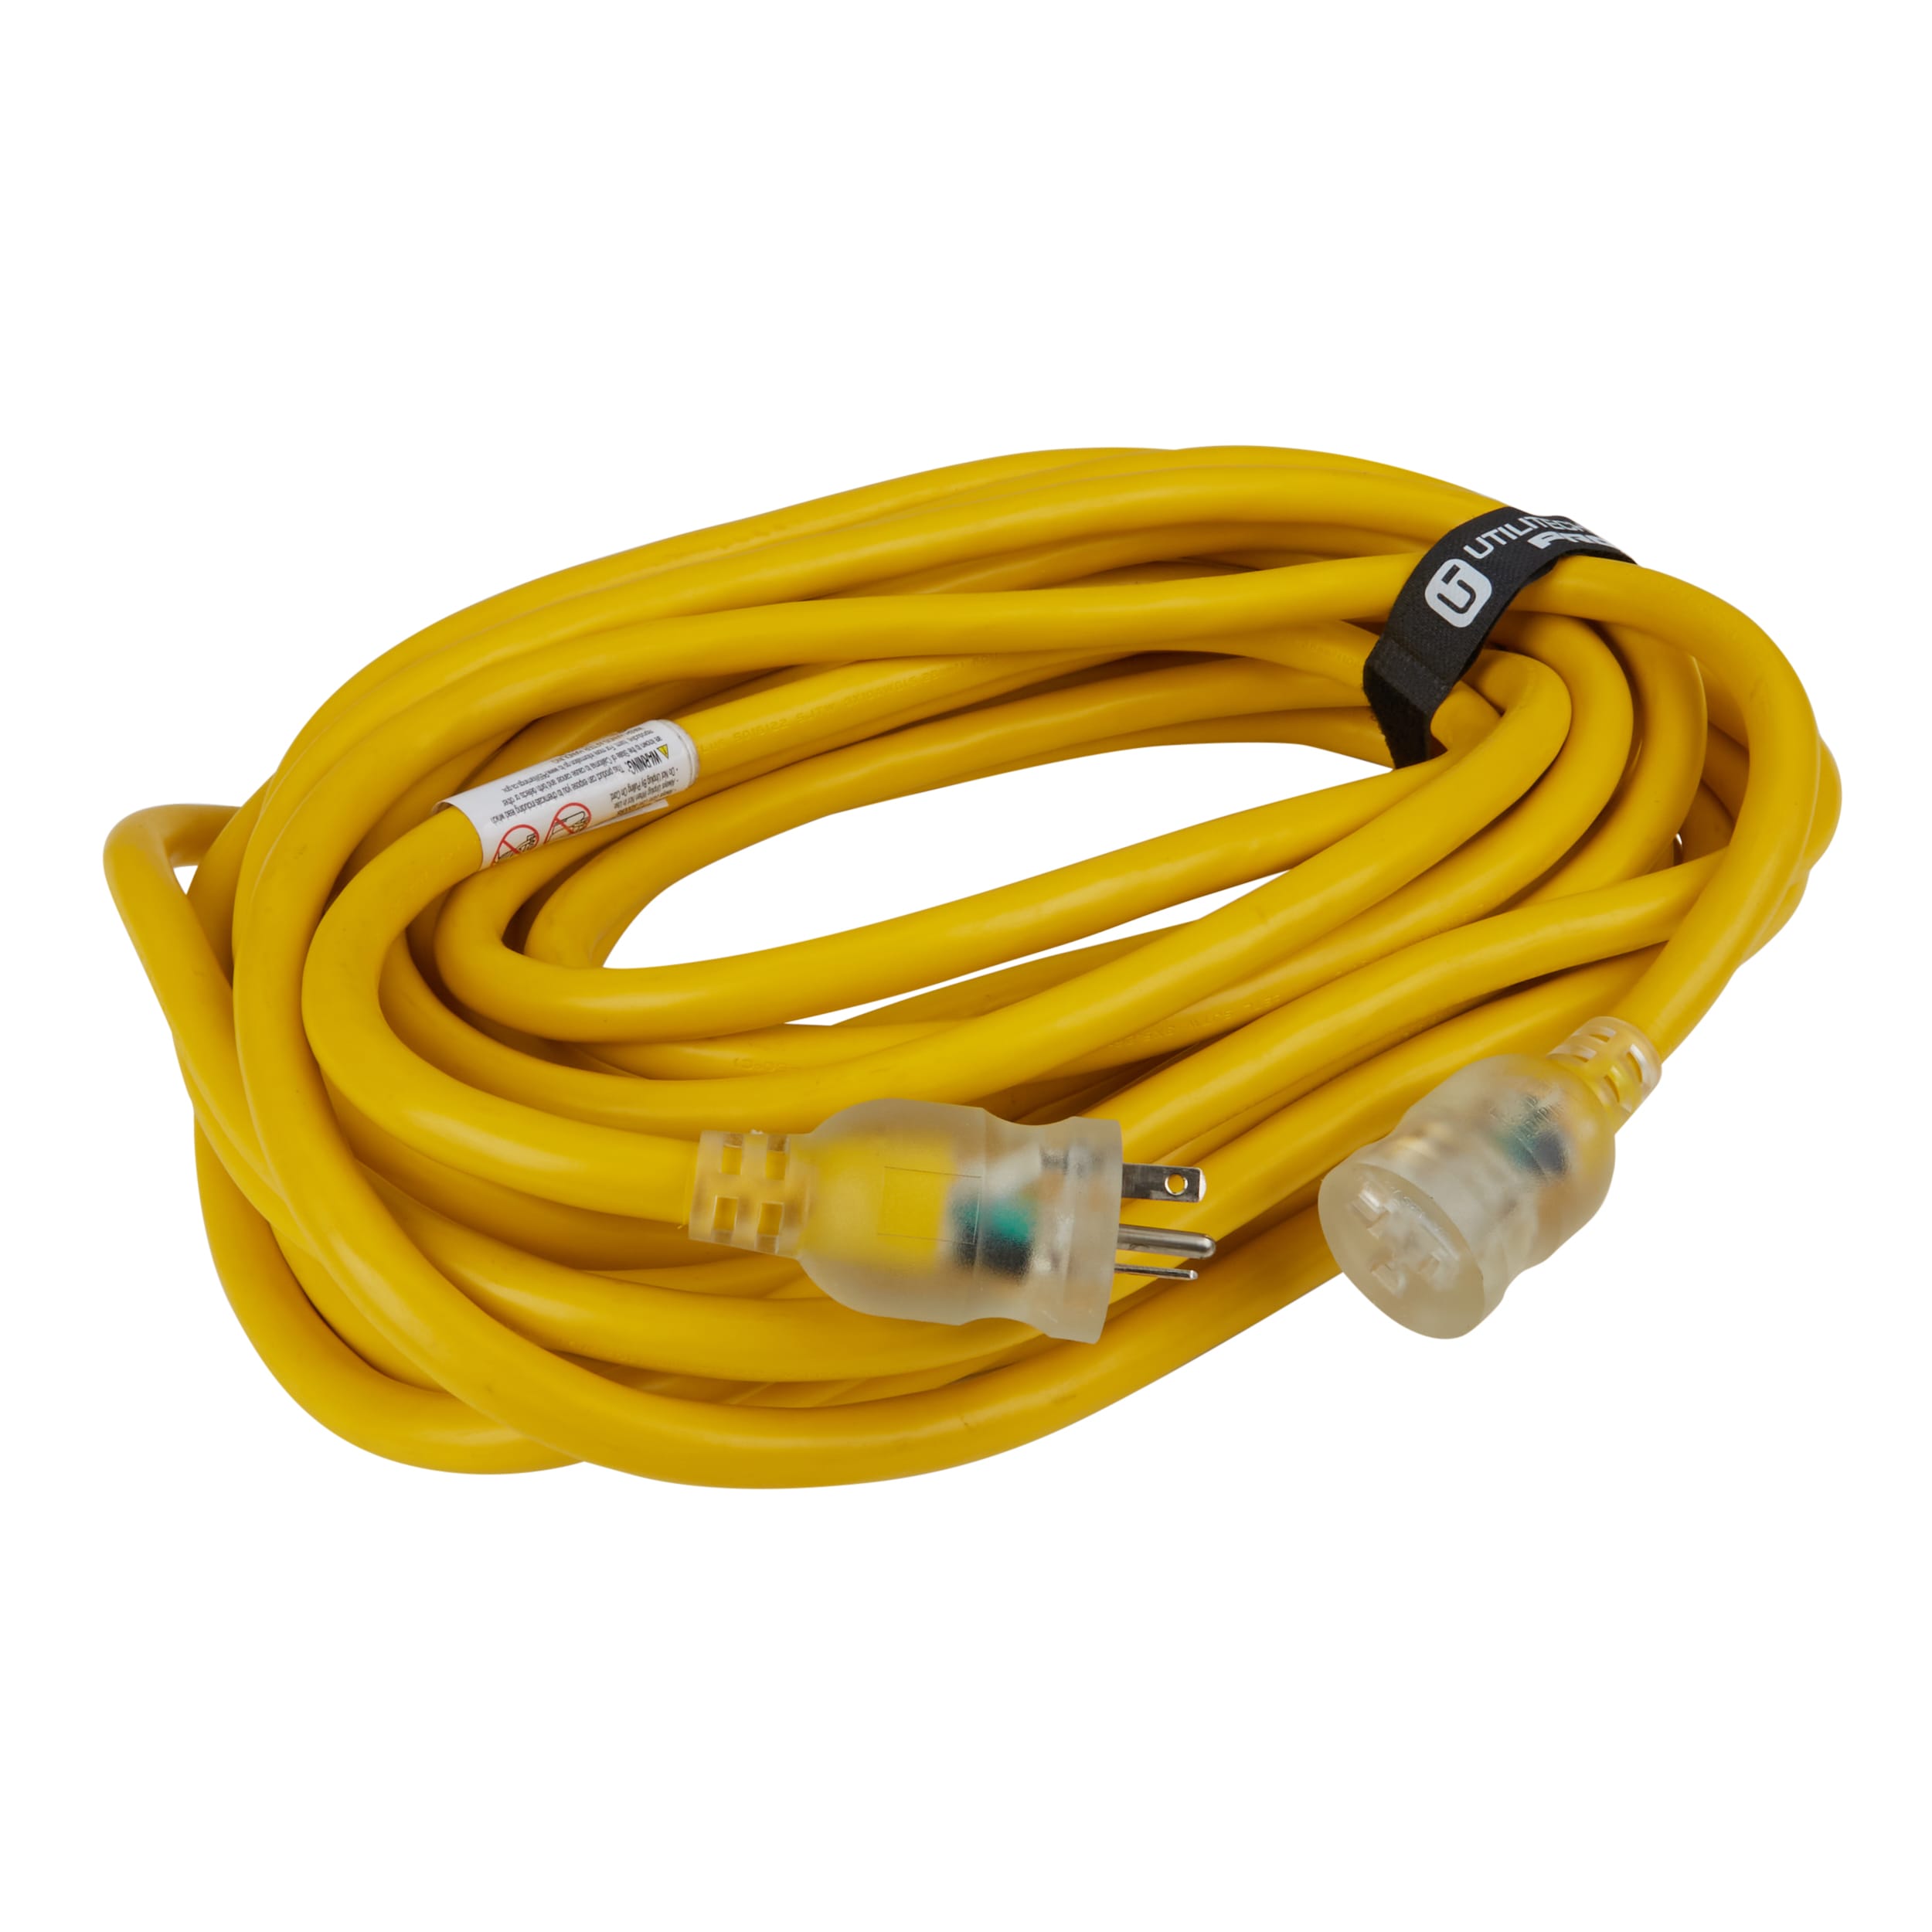 Utilitech Pro 50-ft 10 / 3-Prong Outdoor Sjtw Heavy Duty Lighted Extension  Cord at